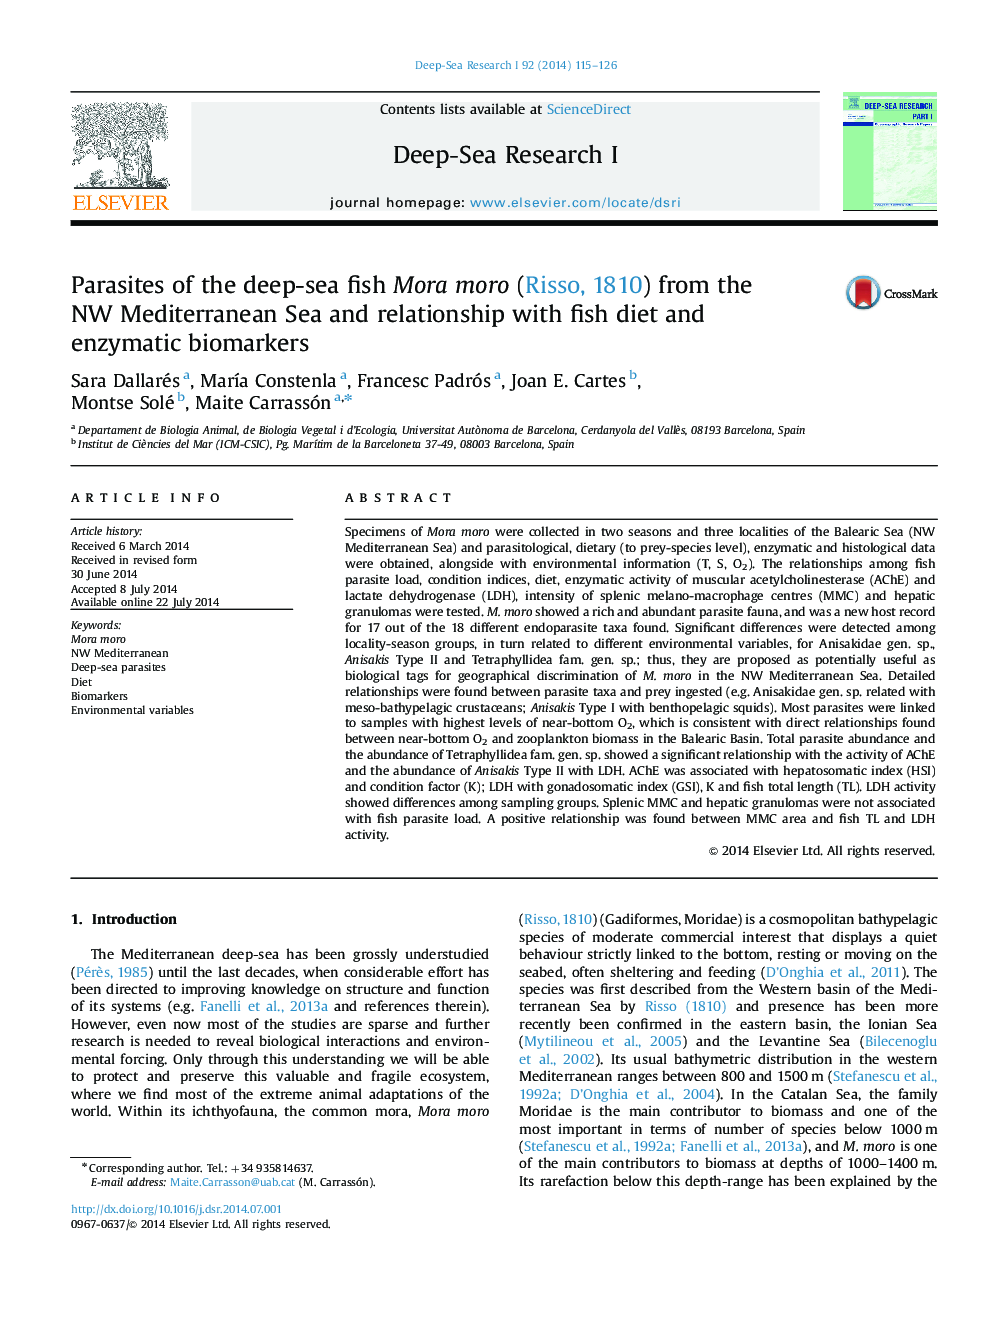 Parasites of the deep-sea fish Mora moro (Risso, 1810) from the NW Mediterranean Sea and relationship with fish diet and enzymatic biomarkers